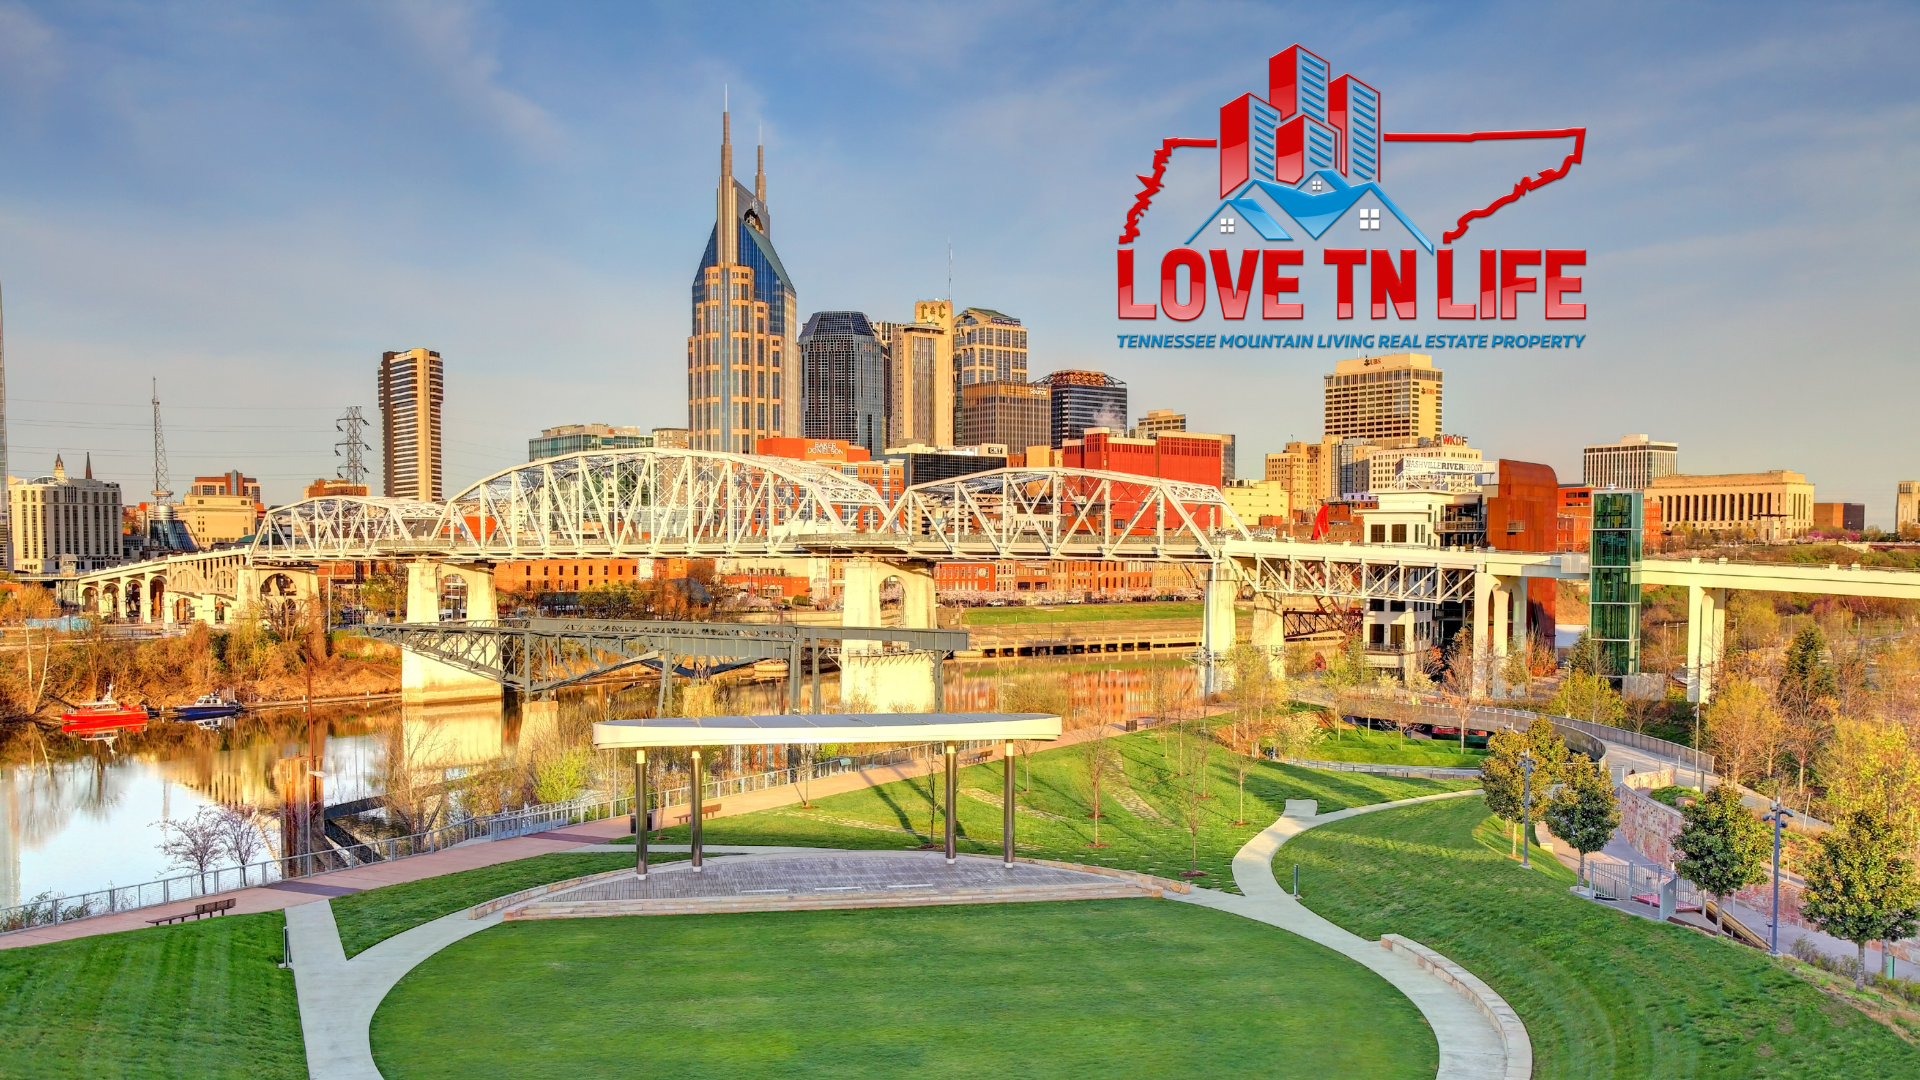 Why Tennessee Real Estate has an advantage 2022